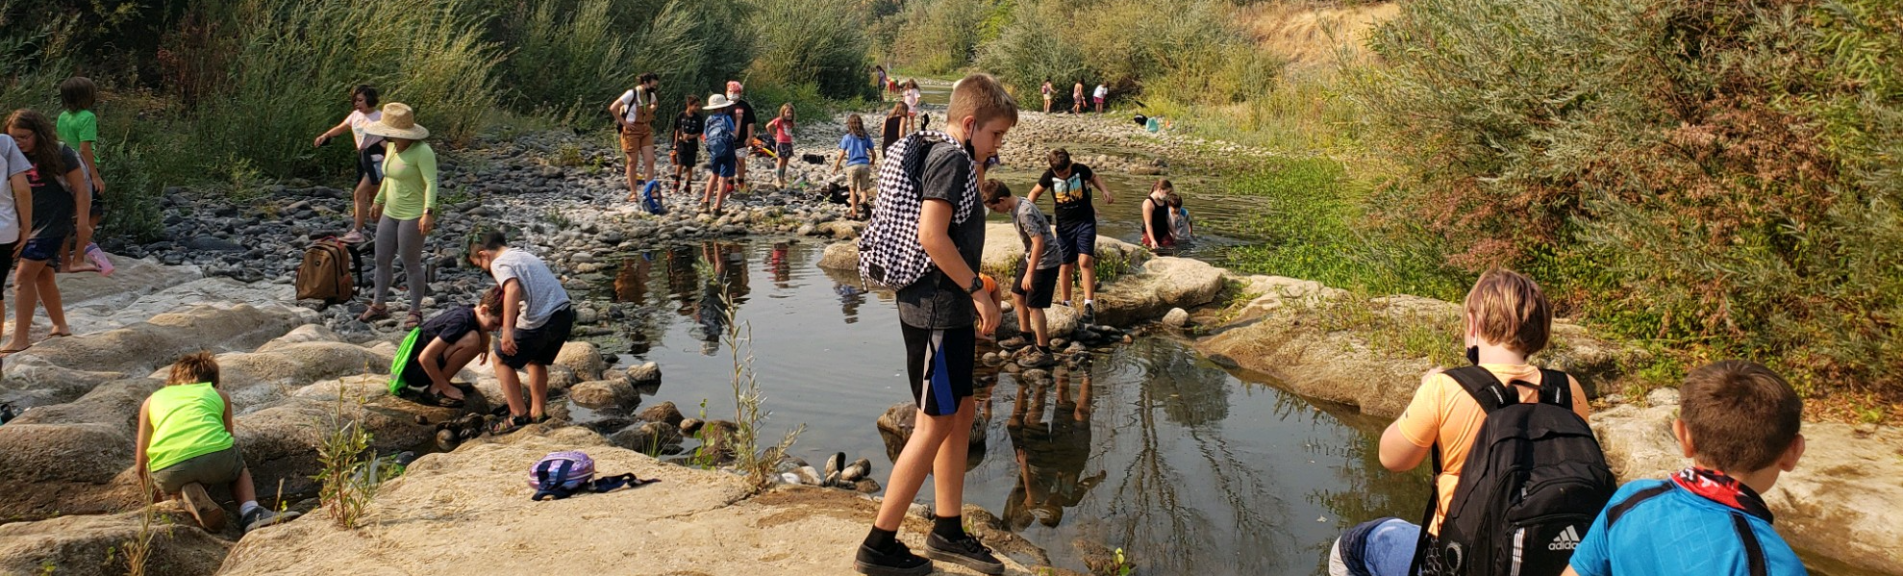 Students exploring in the river